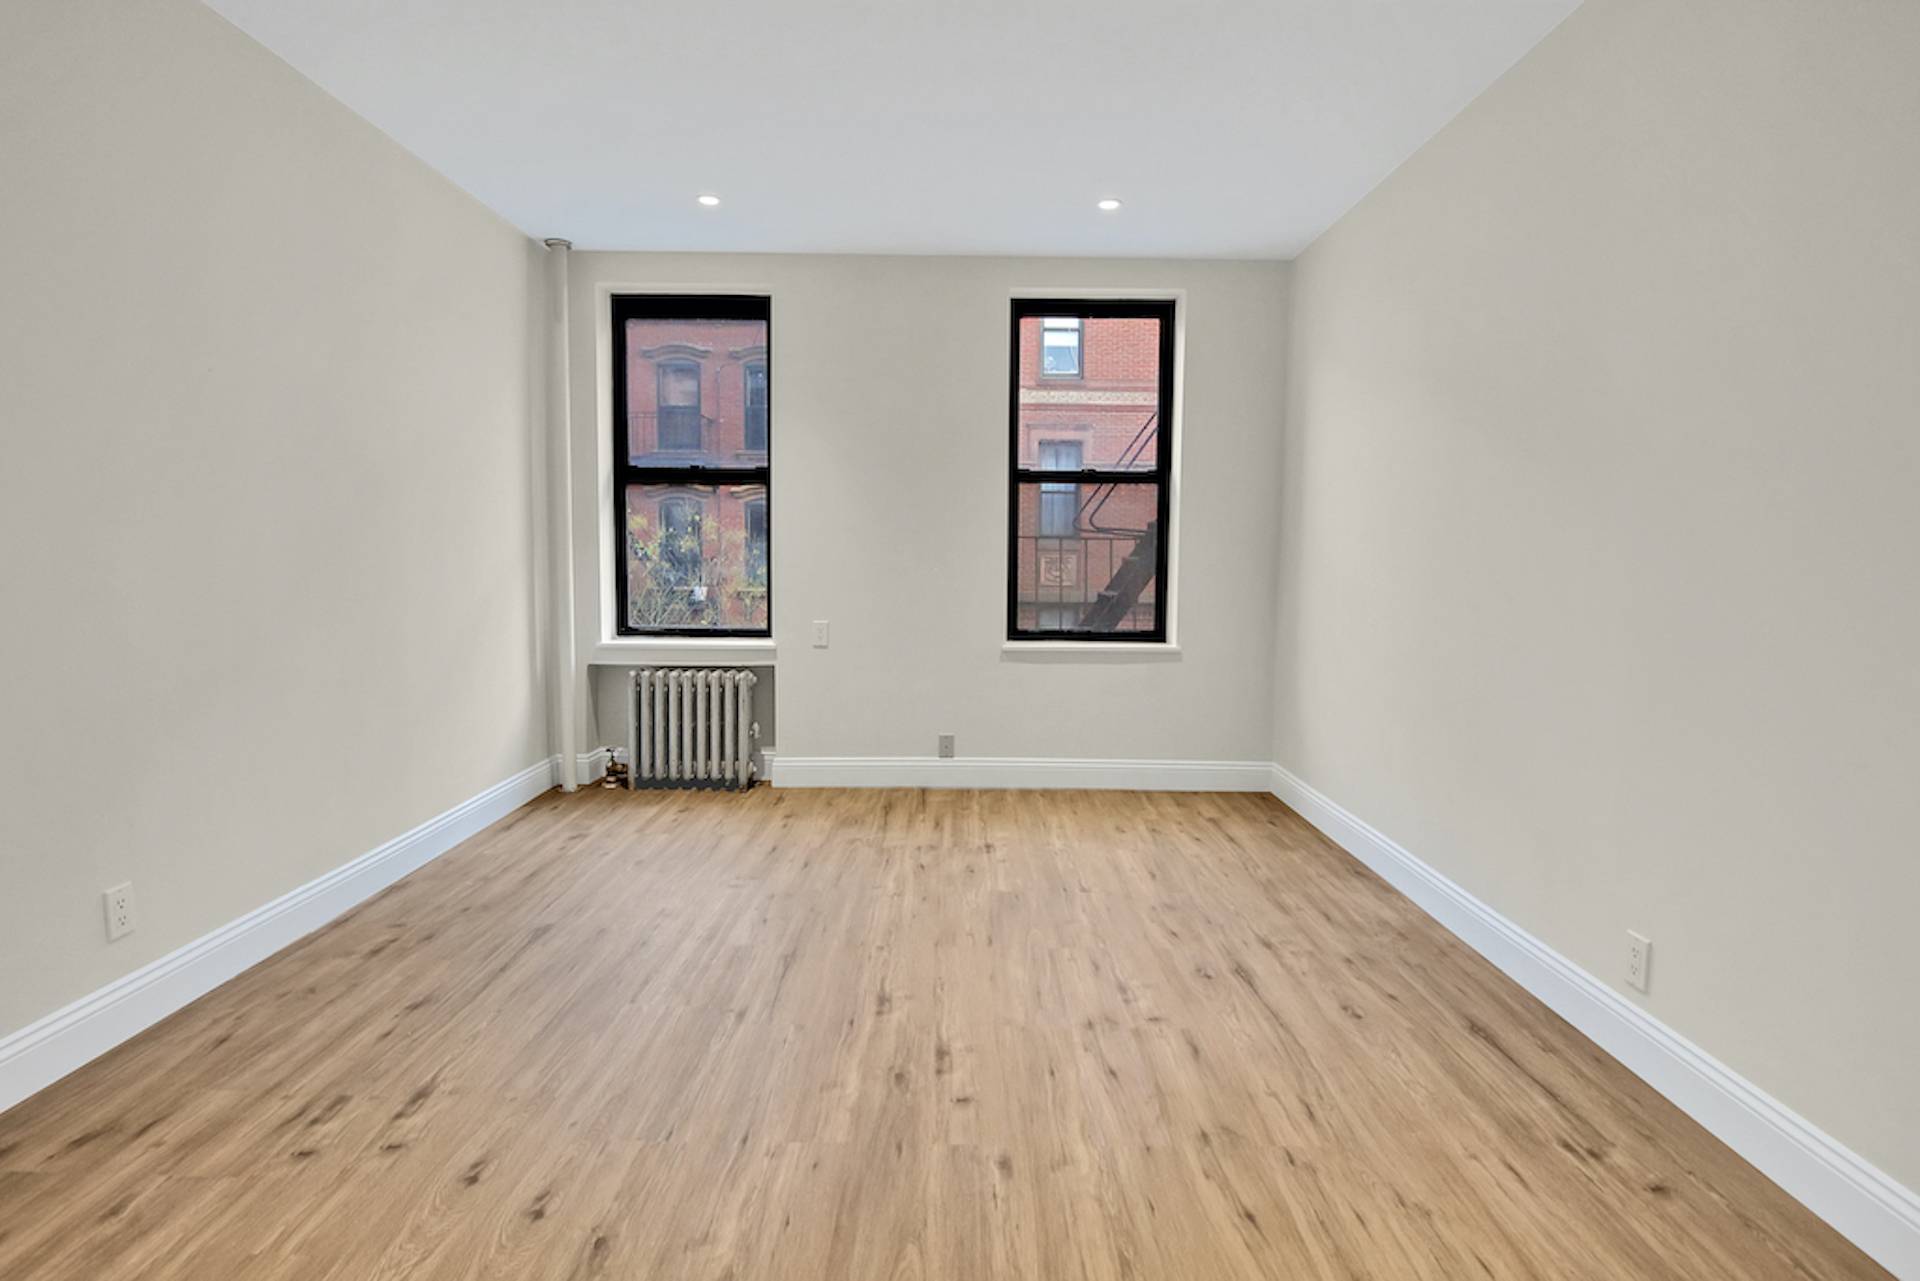 Newly Renovated 1 Bedroom Apartment in the Heart of the Lower East Side.